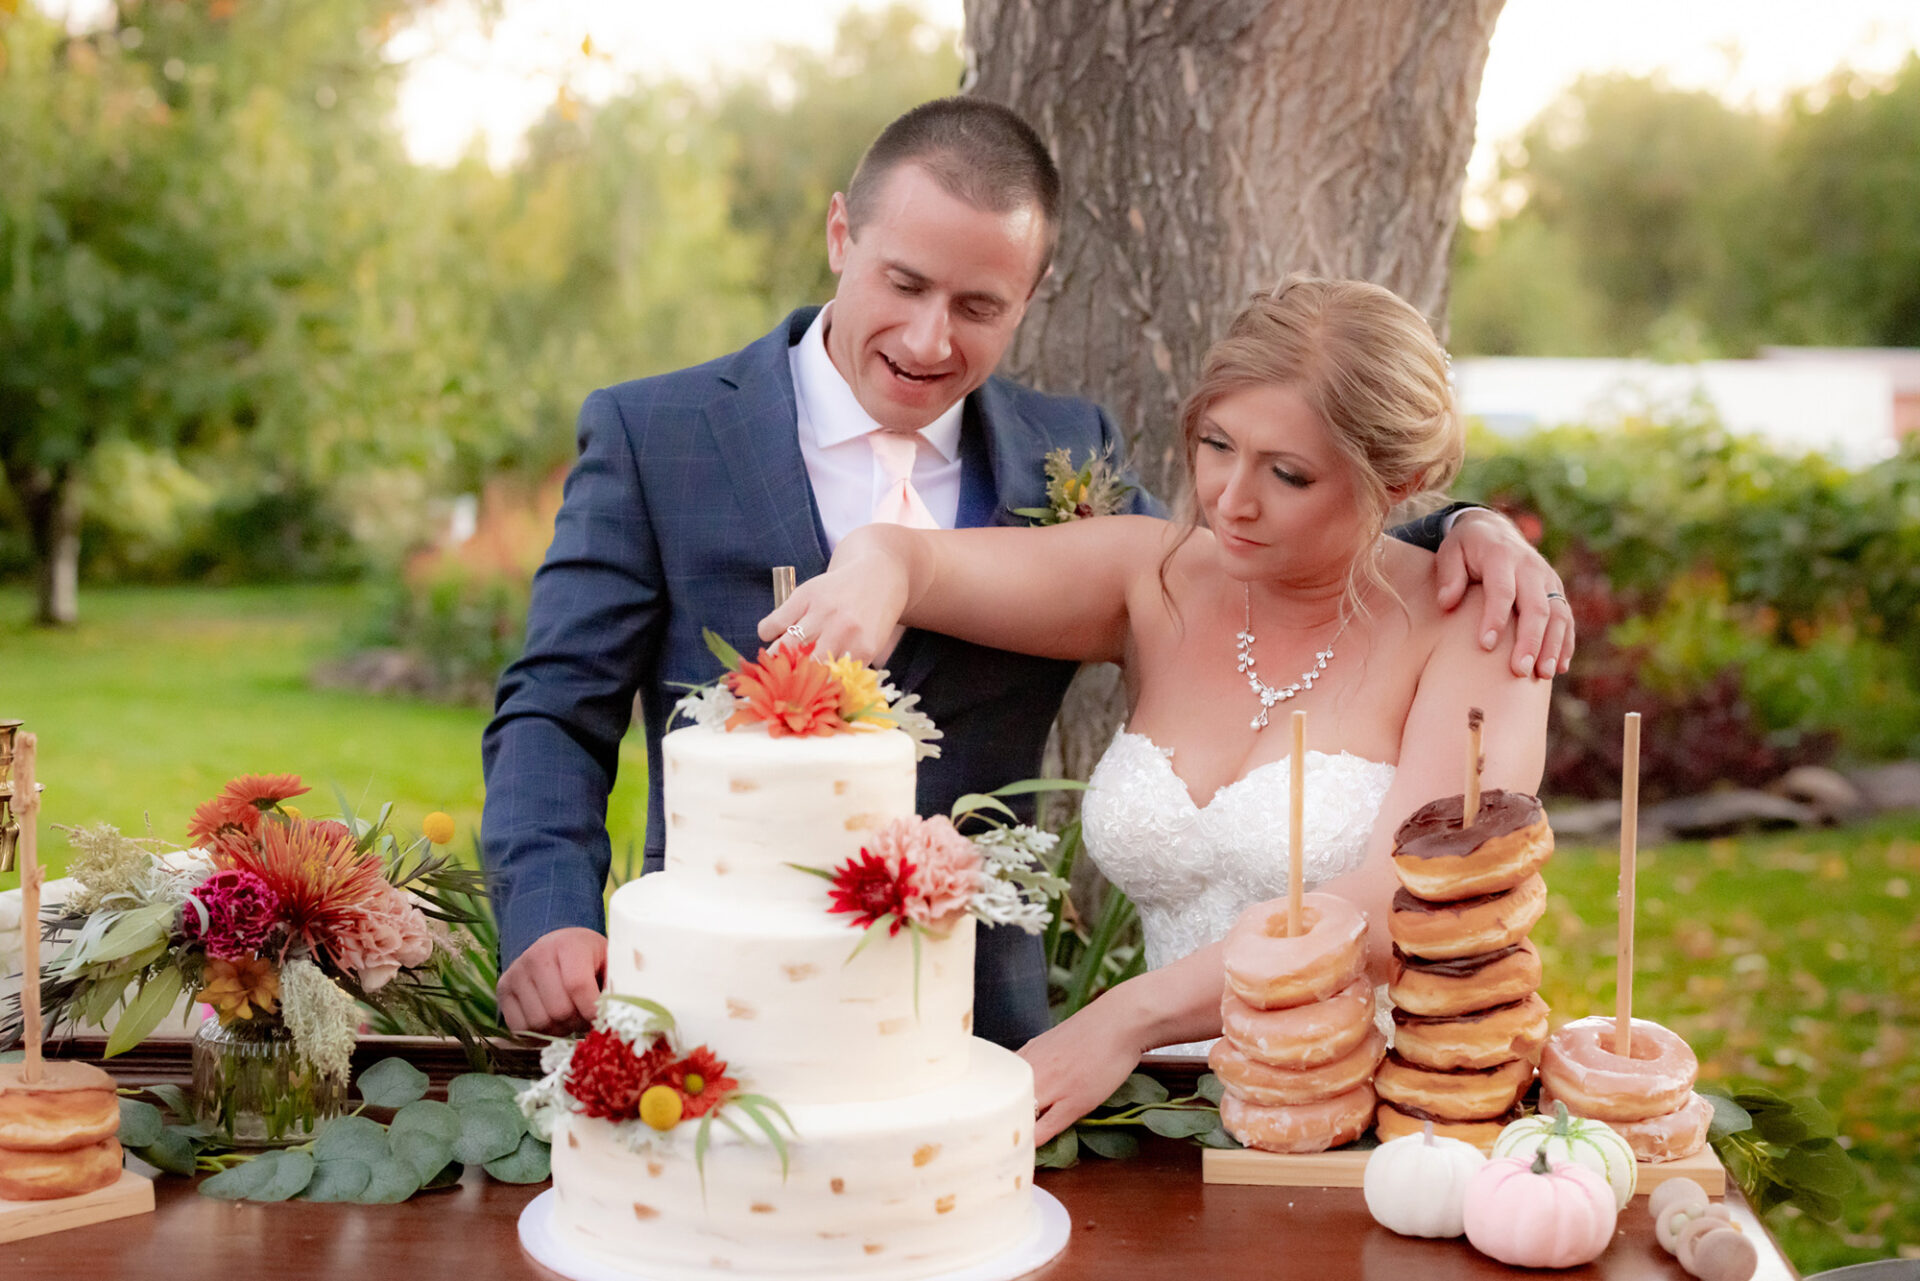 The married couple slicing the wedding cake